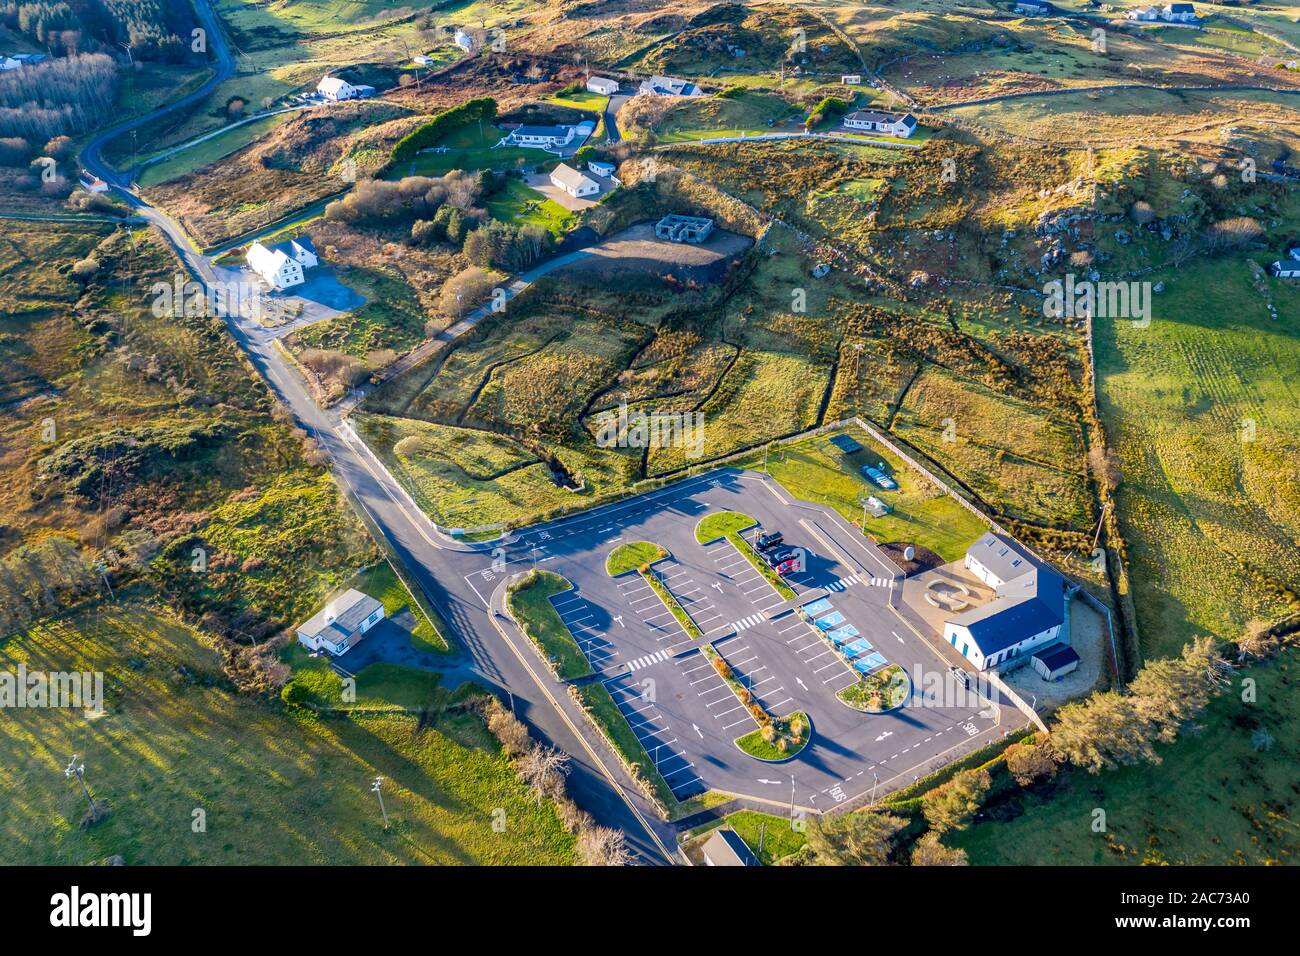 TEELIN, COUNTY DONEGAL / IRELAND - NOVEMBER 29 2019 : Planning permission for the camping site next to the Sliabh Liag visitor center has been granted Stock Photo